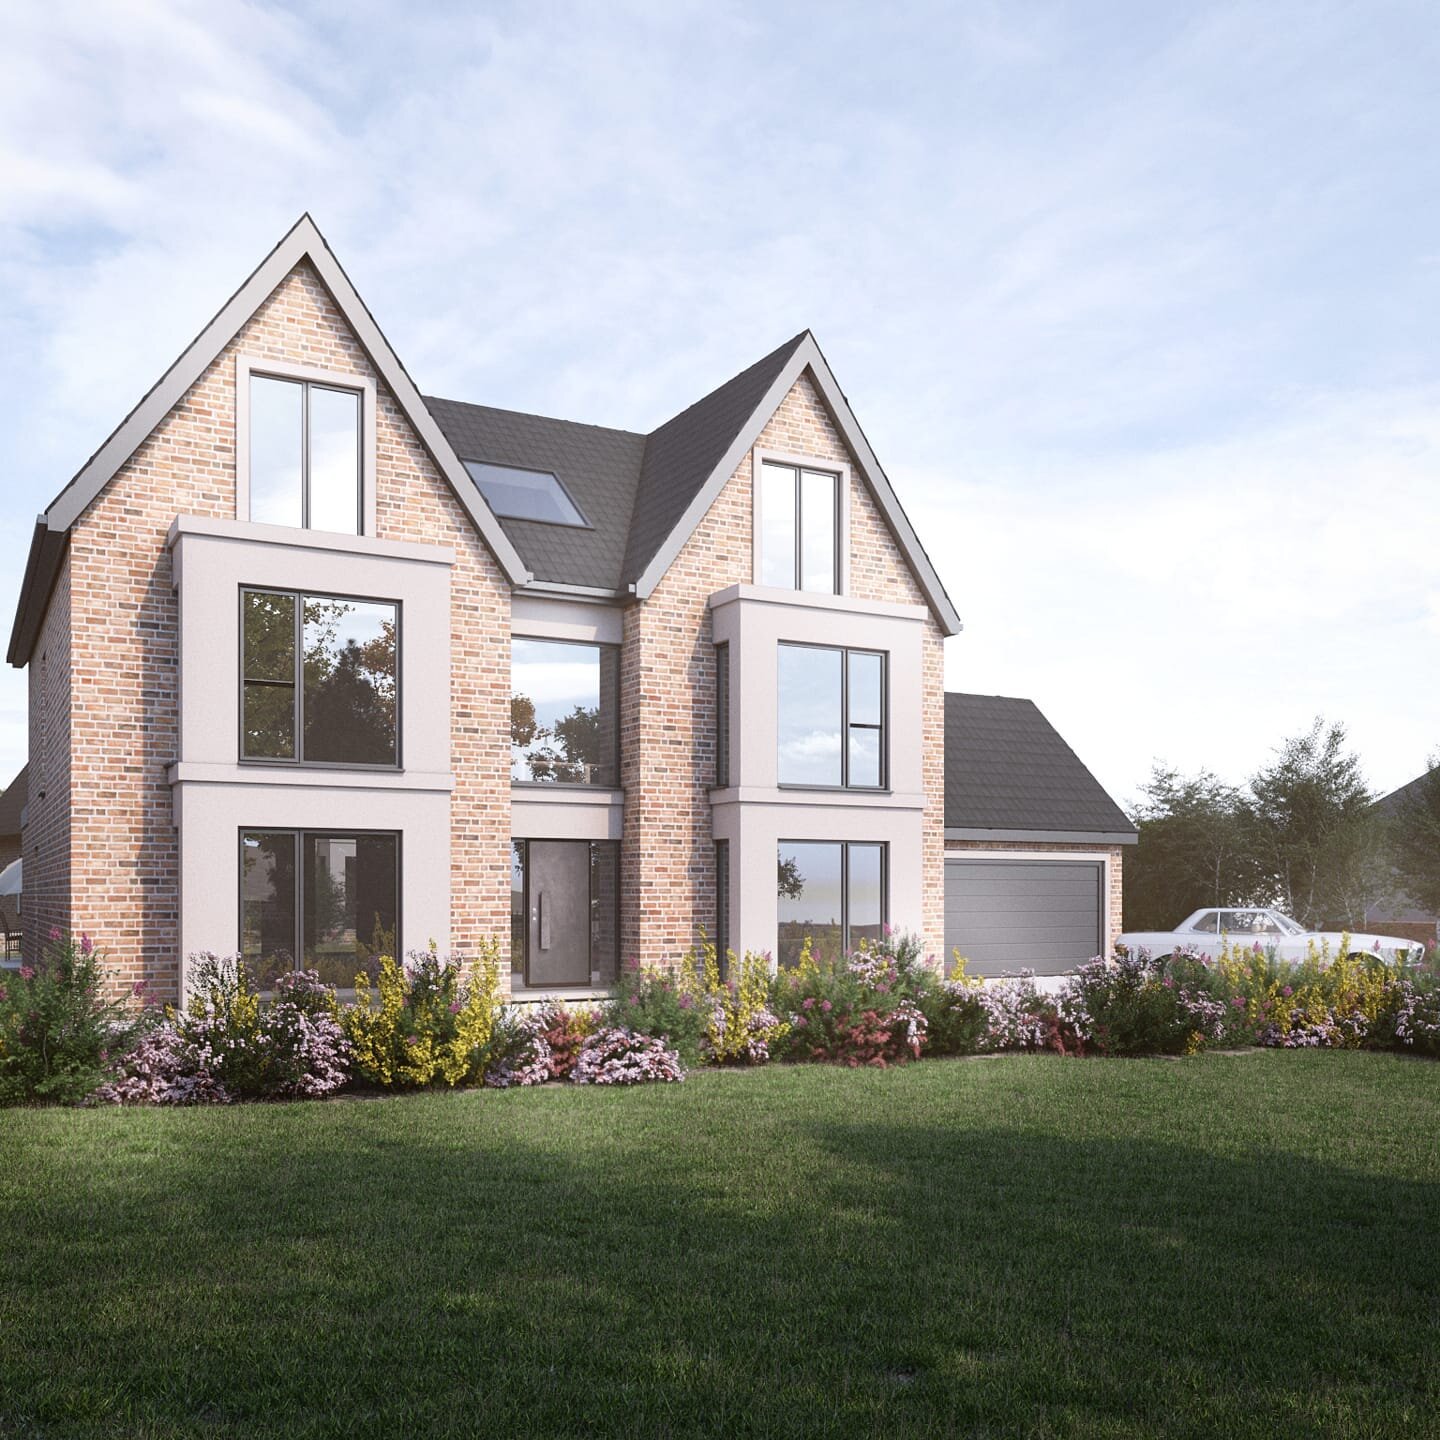 Planning has been submitted for this new build development in Lower Kingswood. It will feature 3 new build houses of high specification with all the 🔔 and 😙.
Fingers crossed for a positive outcome.

#whitemanarchitects #kingswood #lowerkingswood #s